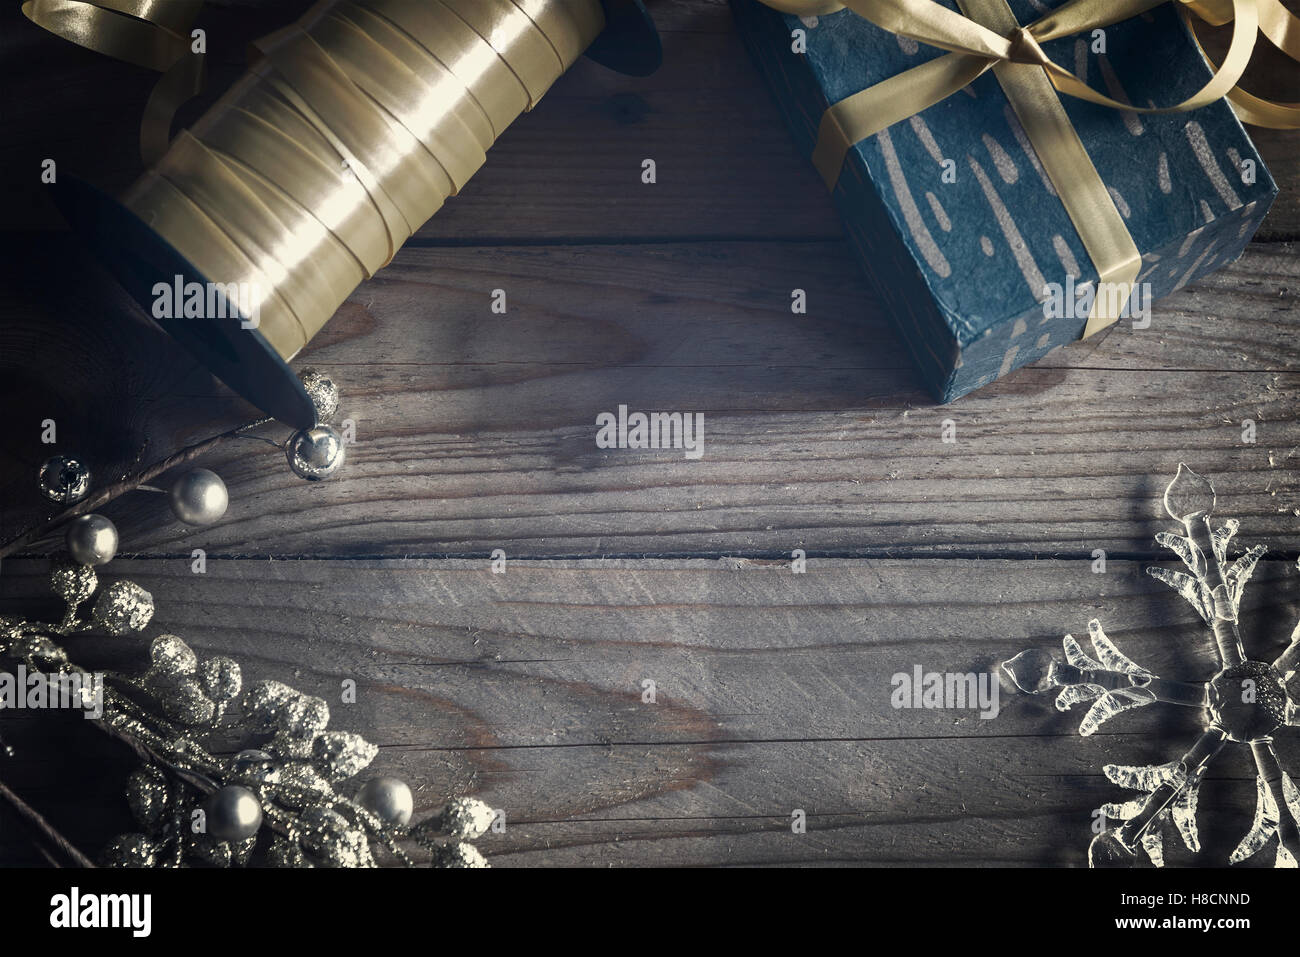 Image of christmas objects flatlay on wooden background. Stock Photo